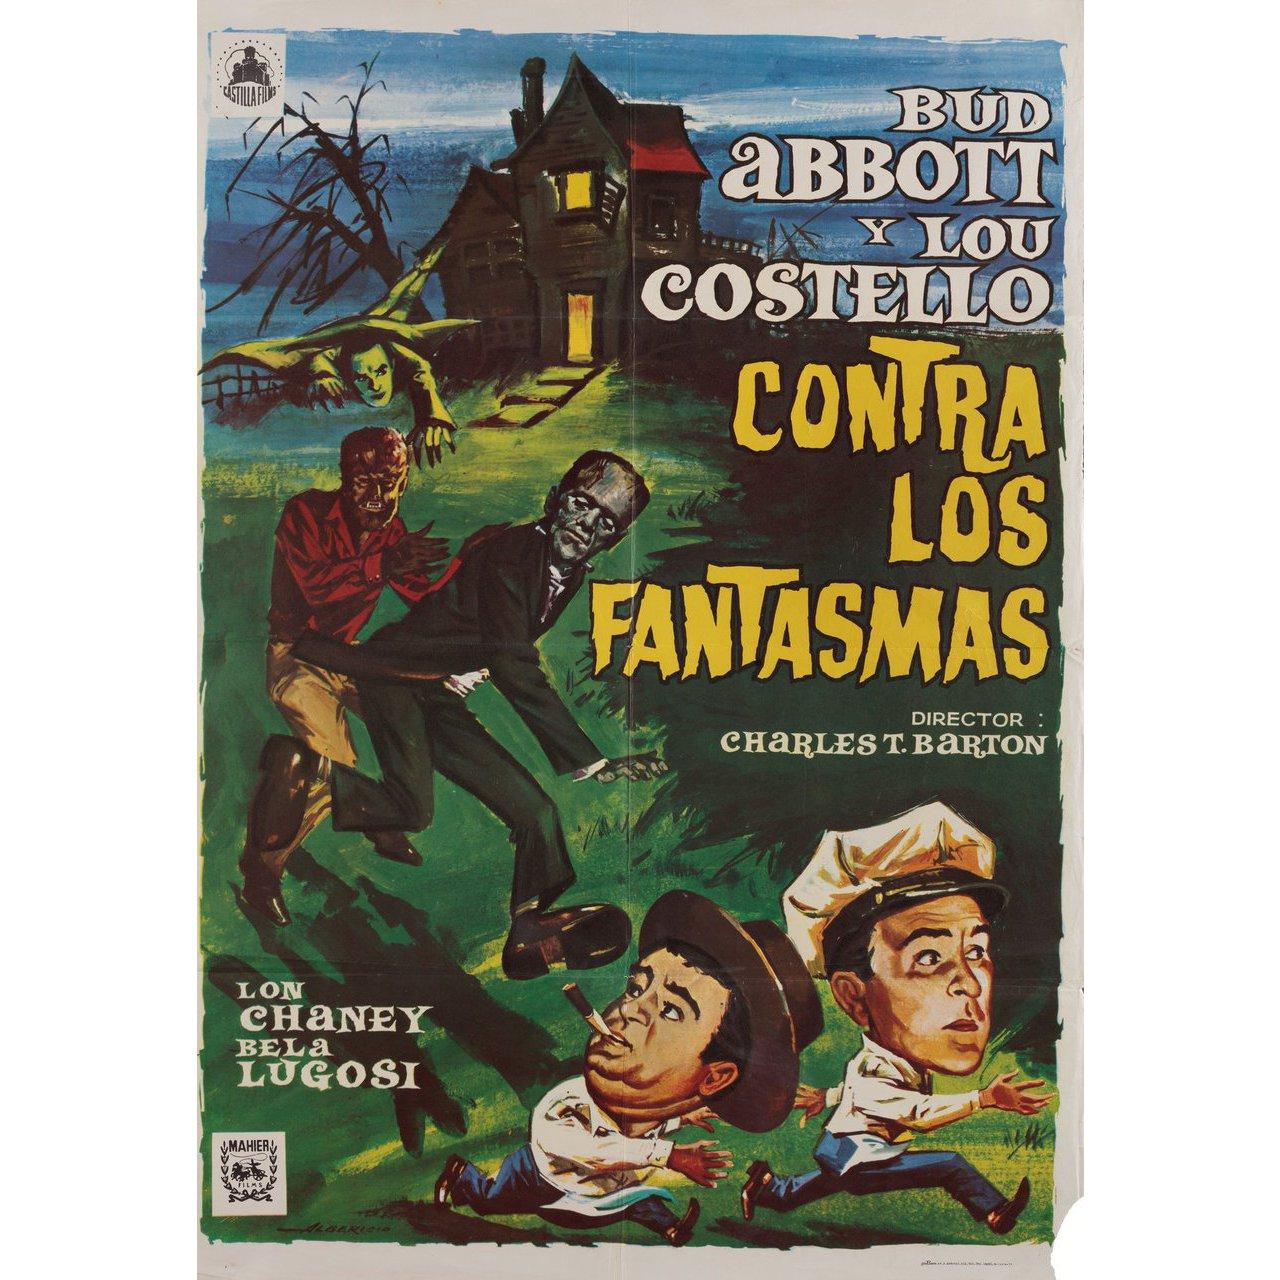 Original 1975 re-release Spanish B1 poster by Fernando Albericio for the 1948 film Abbott and Costello Meet Frankenstein (Bud Abbott Lou Costello Meet Frankenstein) directed by Charles Barton with Bud Abbott / Lou Costello / Lon Chaney Jr. / Bela